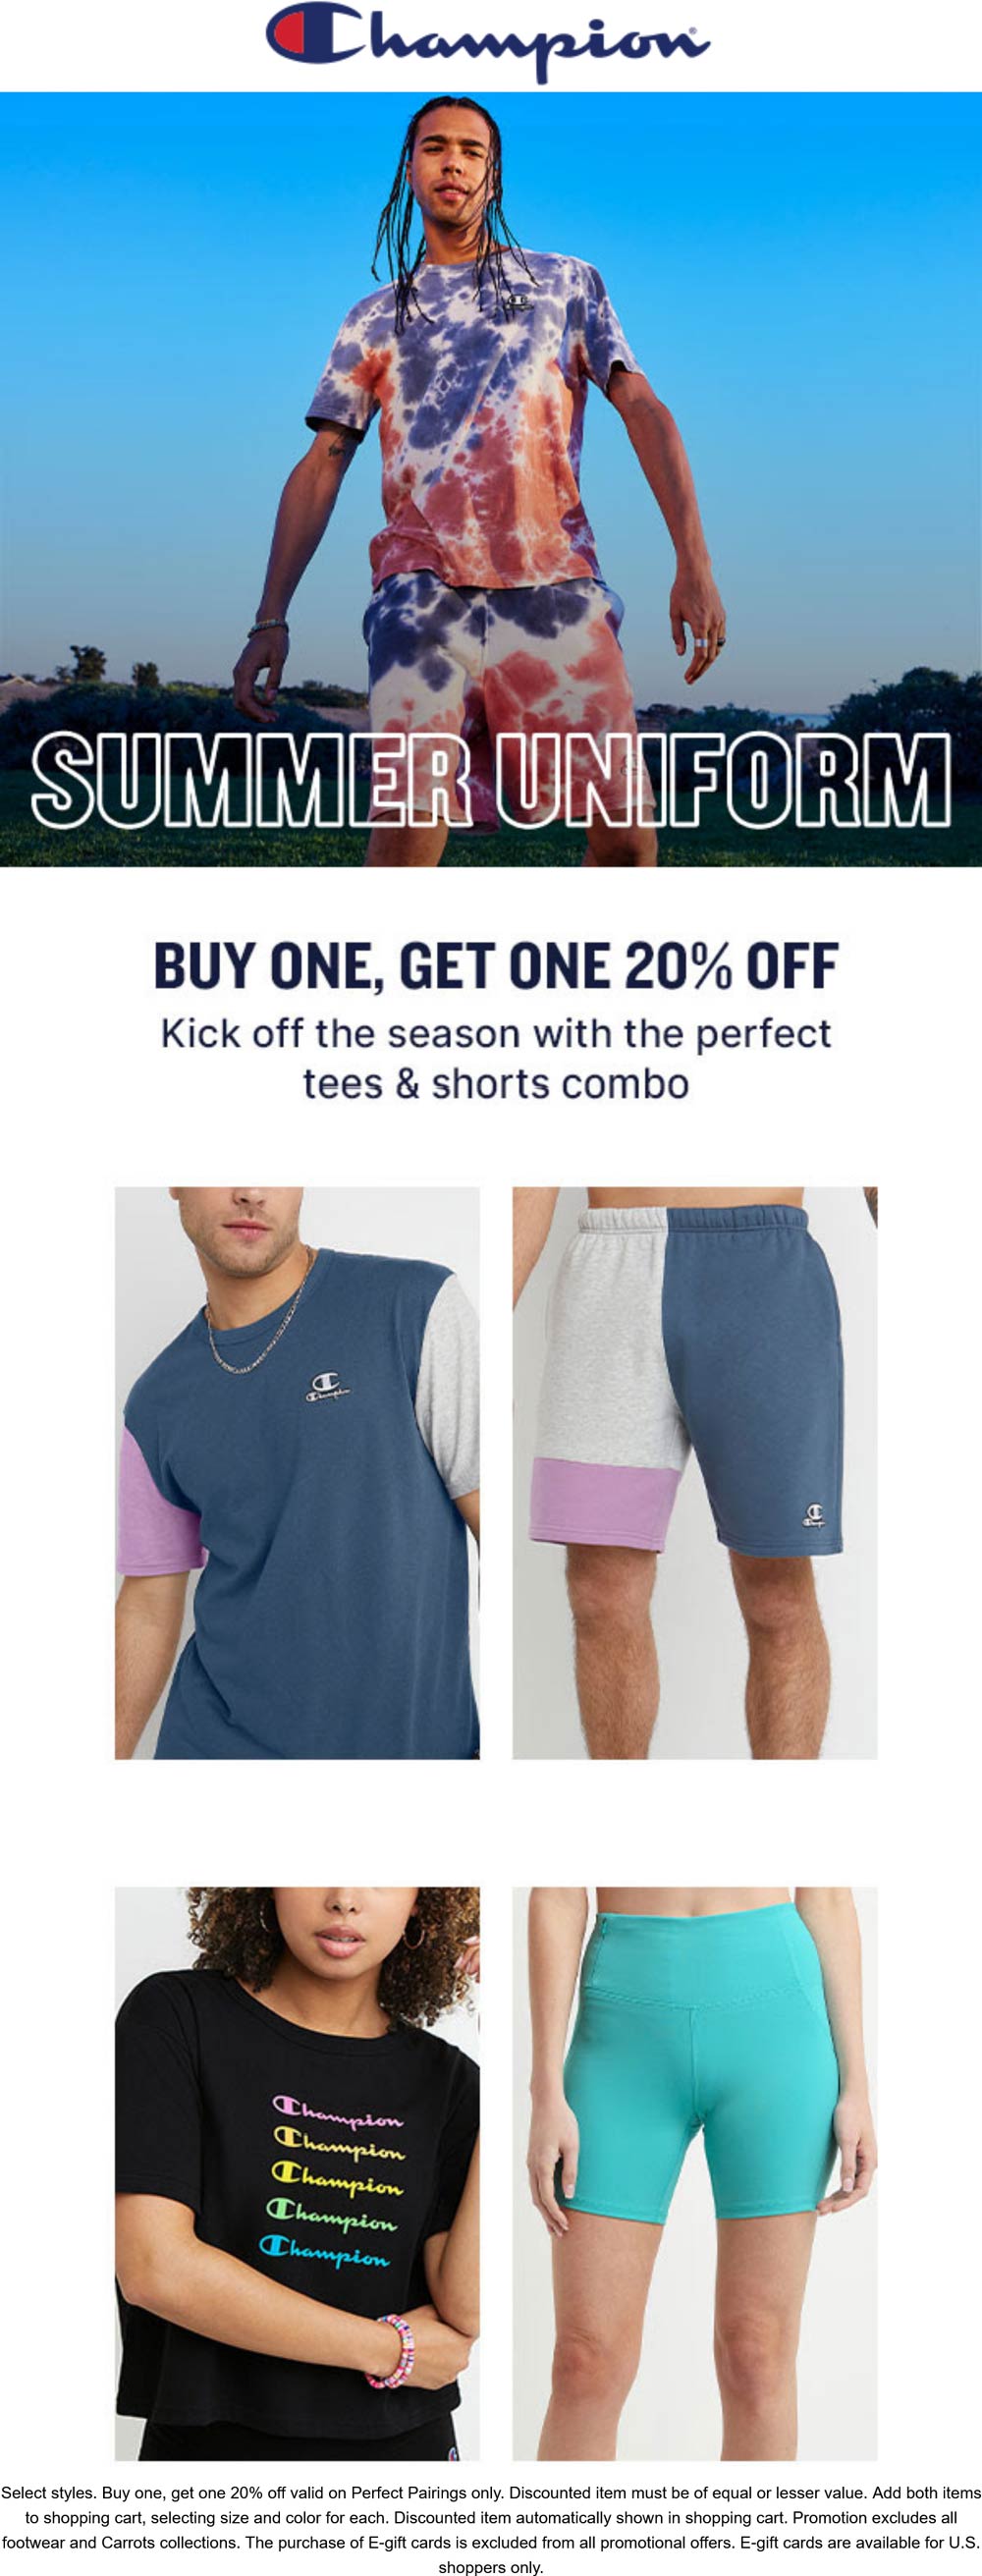 Champion stores Coupon  Second paired item 20% off online today at Champion #champion 